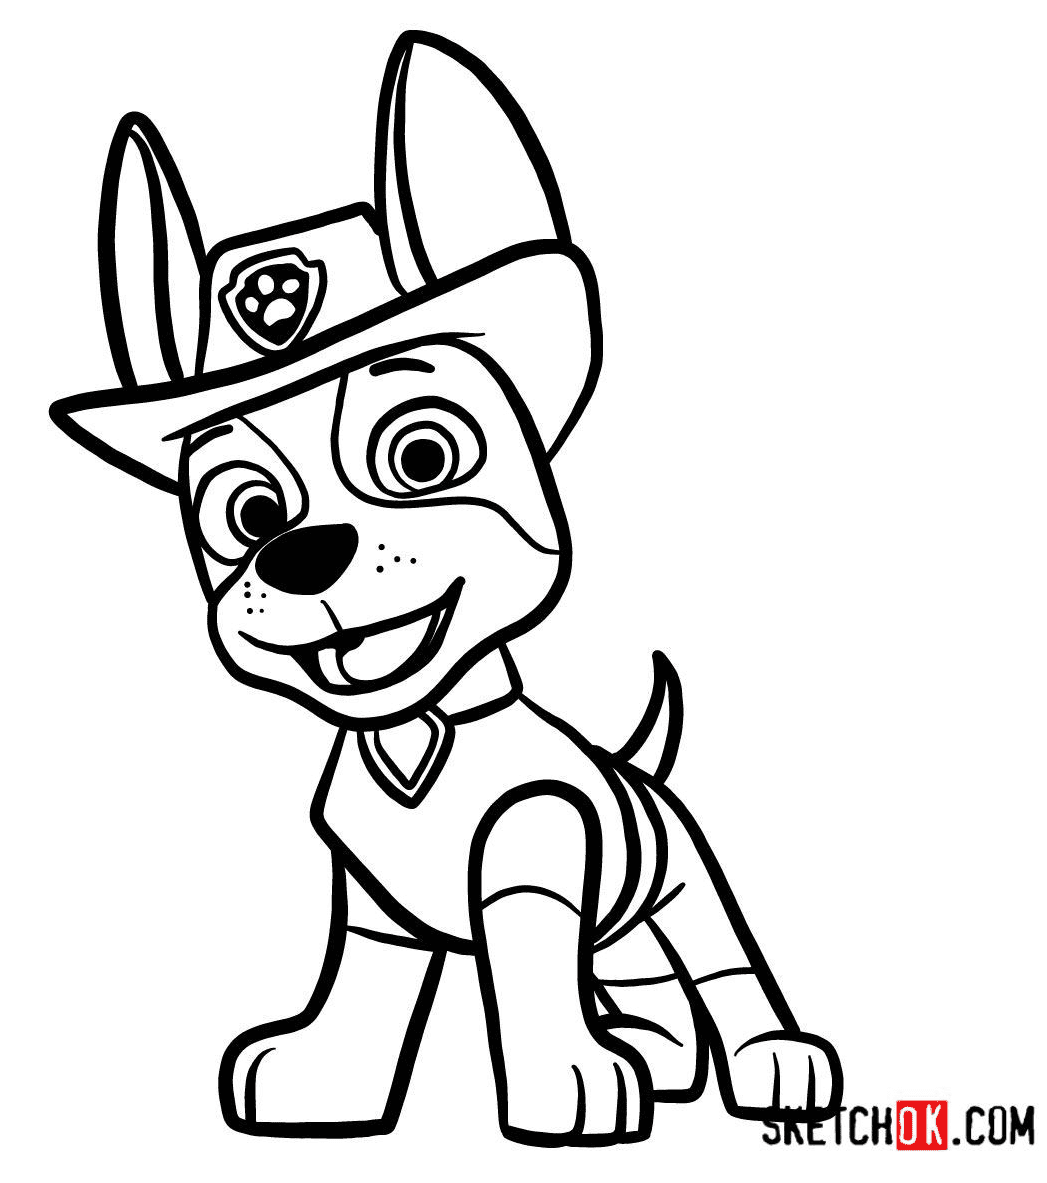 Tracker in Paw Patrol Coloring Page